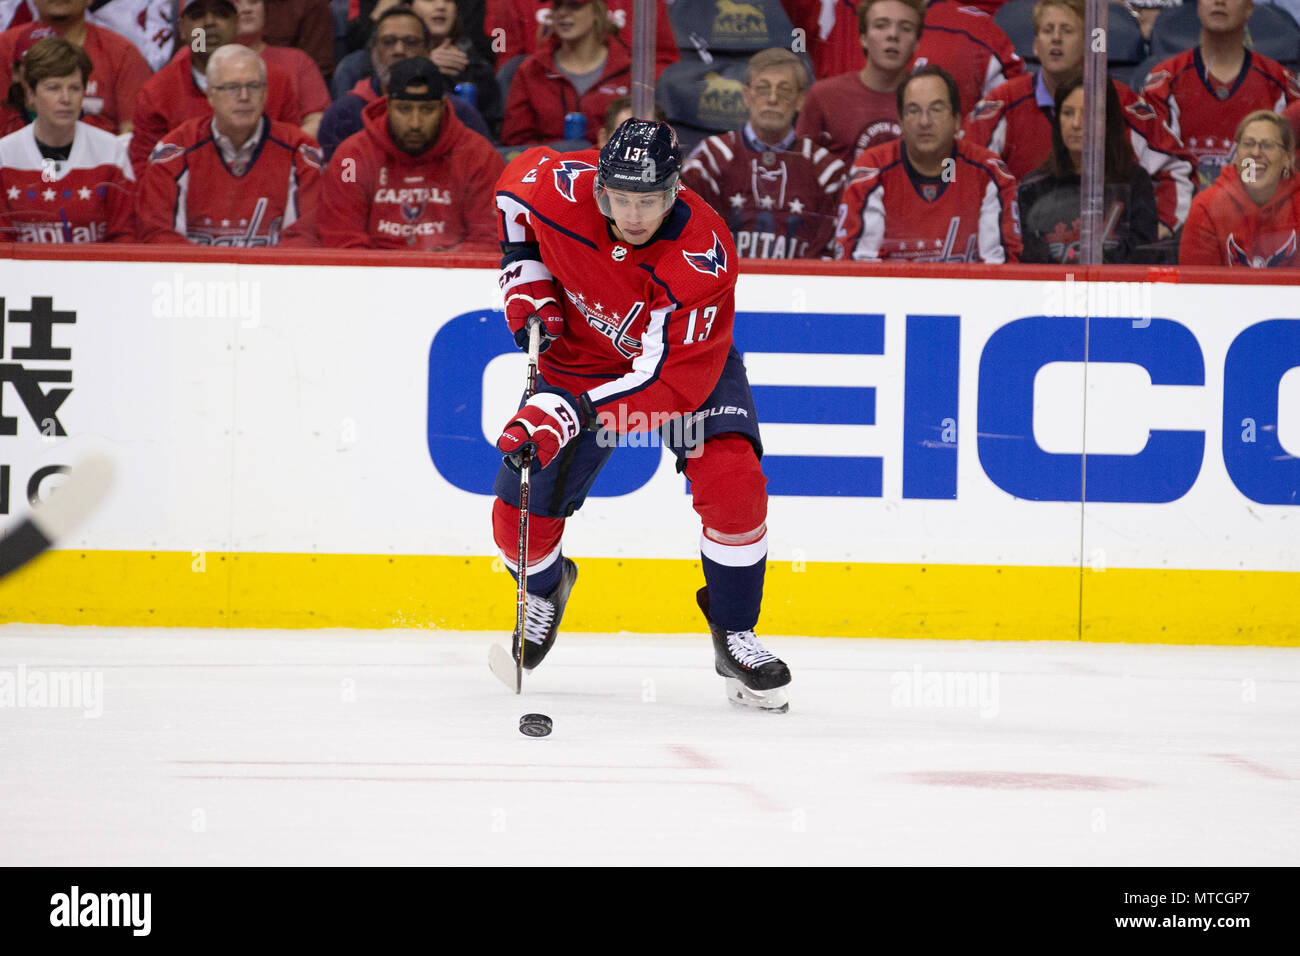 For Jakub Vrana, forward sees new lease on life on, off ice with